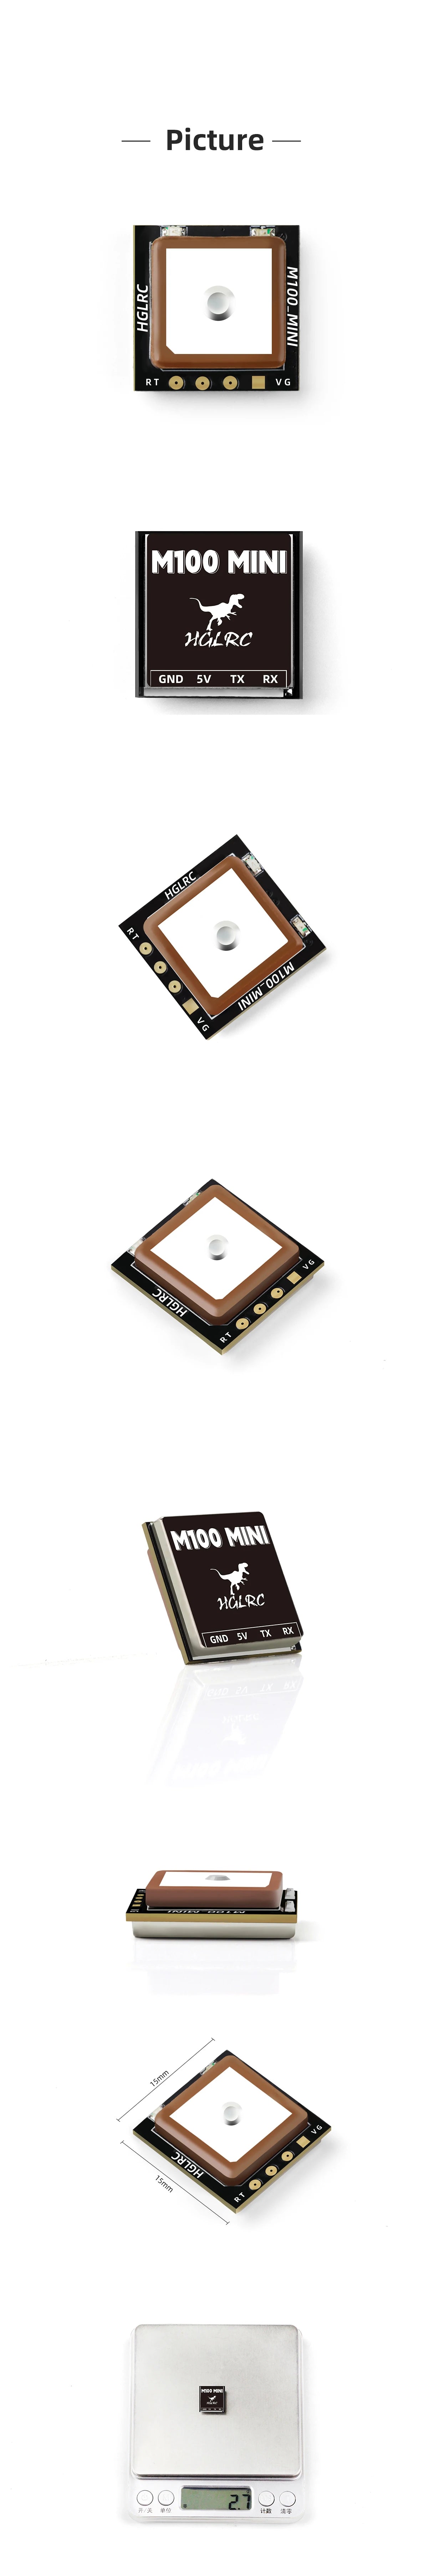 HGLRC M100 MINI GPS 10th Generation UBLOX Chip Specification: Chip